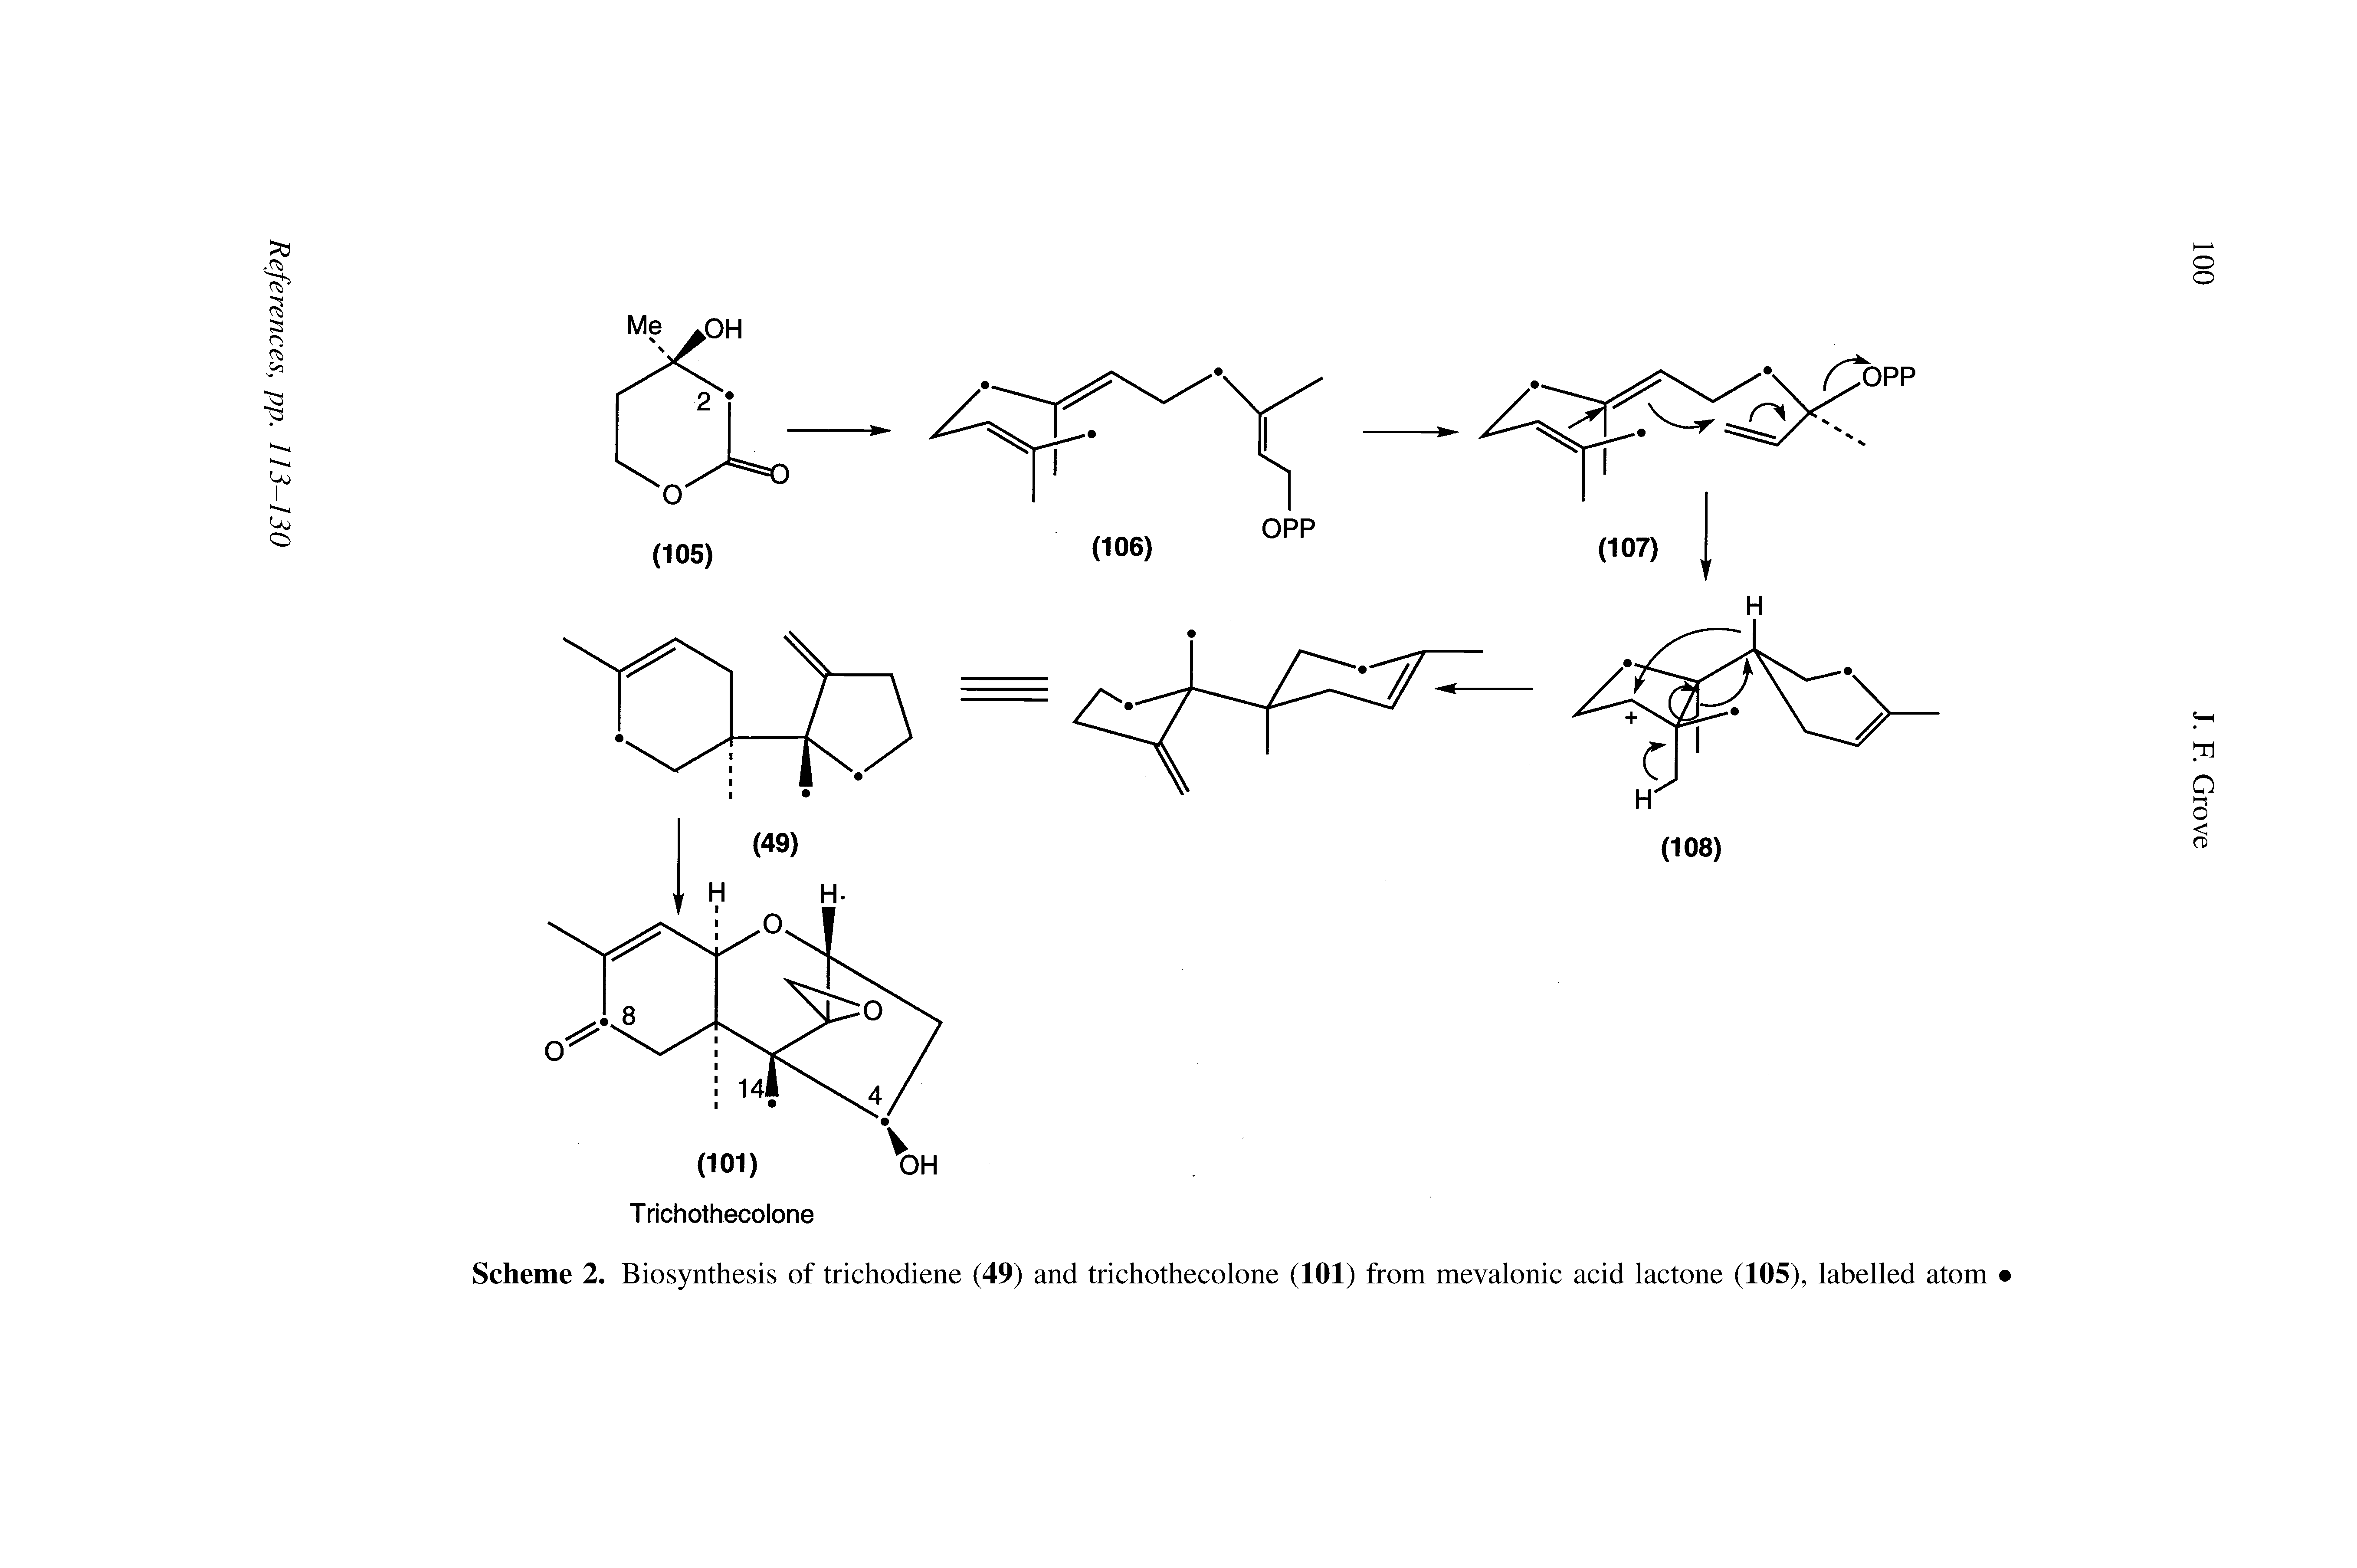 Scheme 2. Biosynthesis of trichodiene (49) and trichothecolone (101) from mevalonic acid lactone (105), labelled atom <...